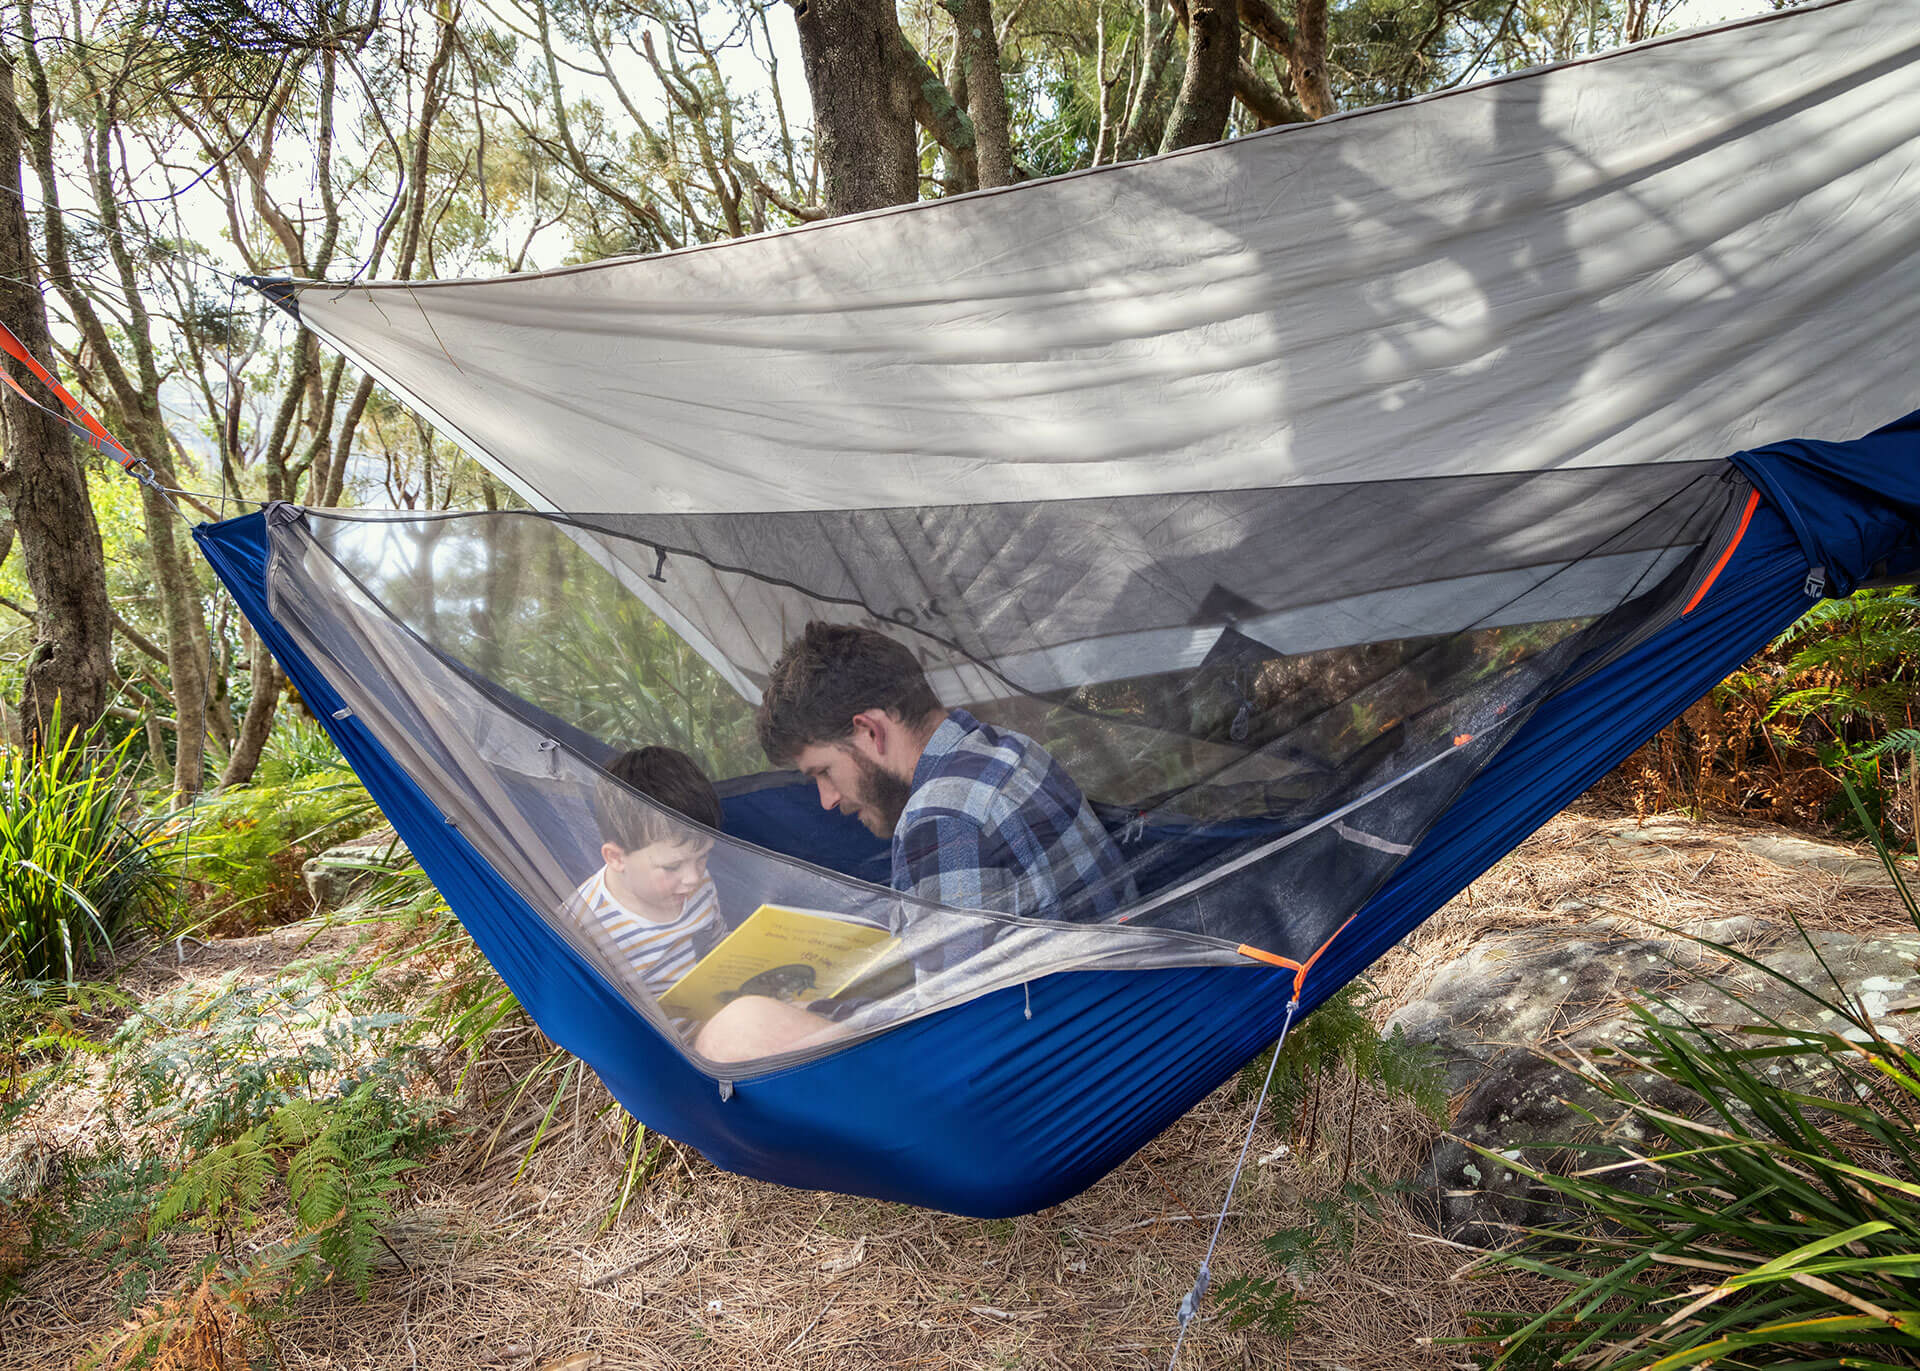 Man and child sitting in a Kammok Mantis all-in-one hammock tent with bug net and weather shelter hung between trees.